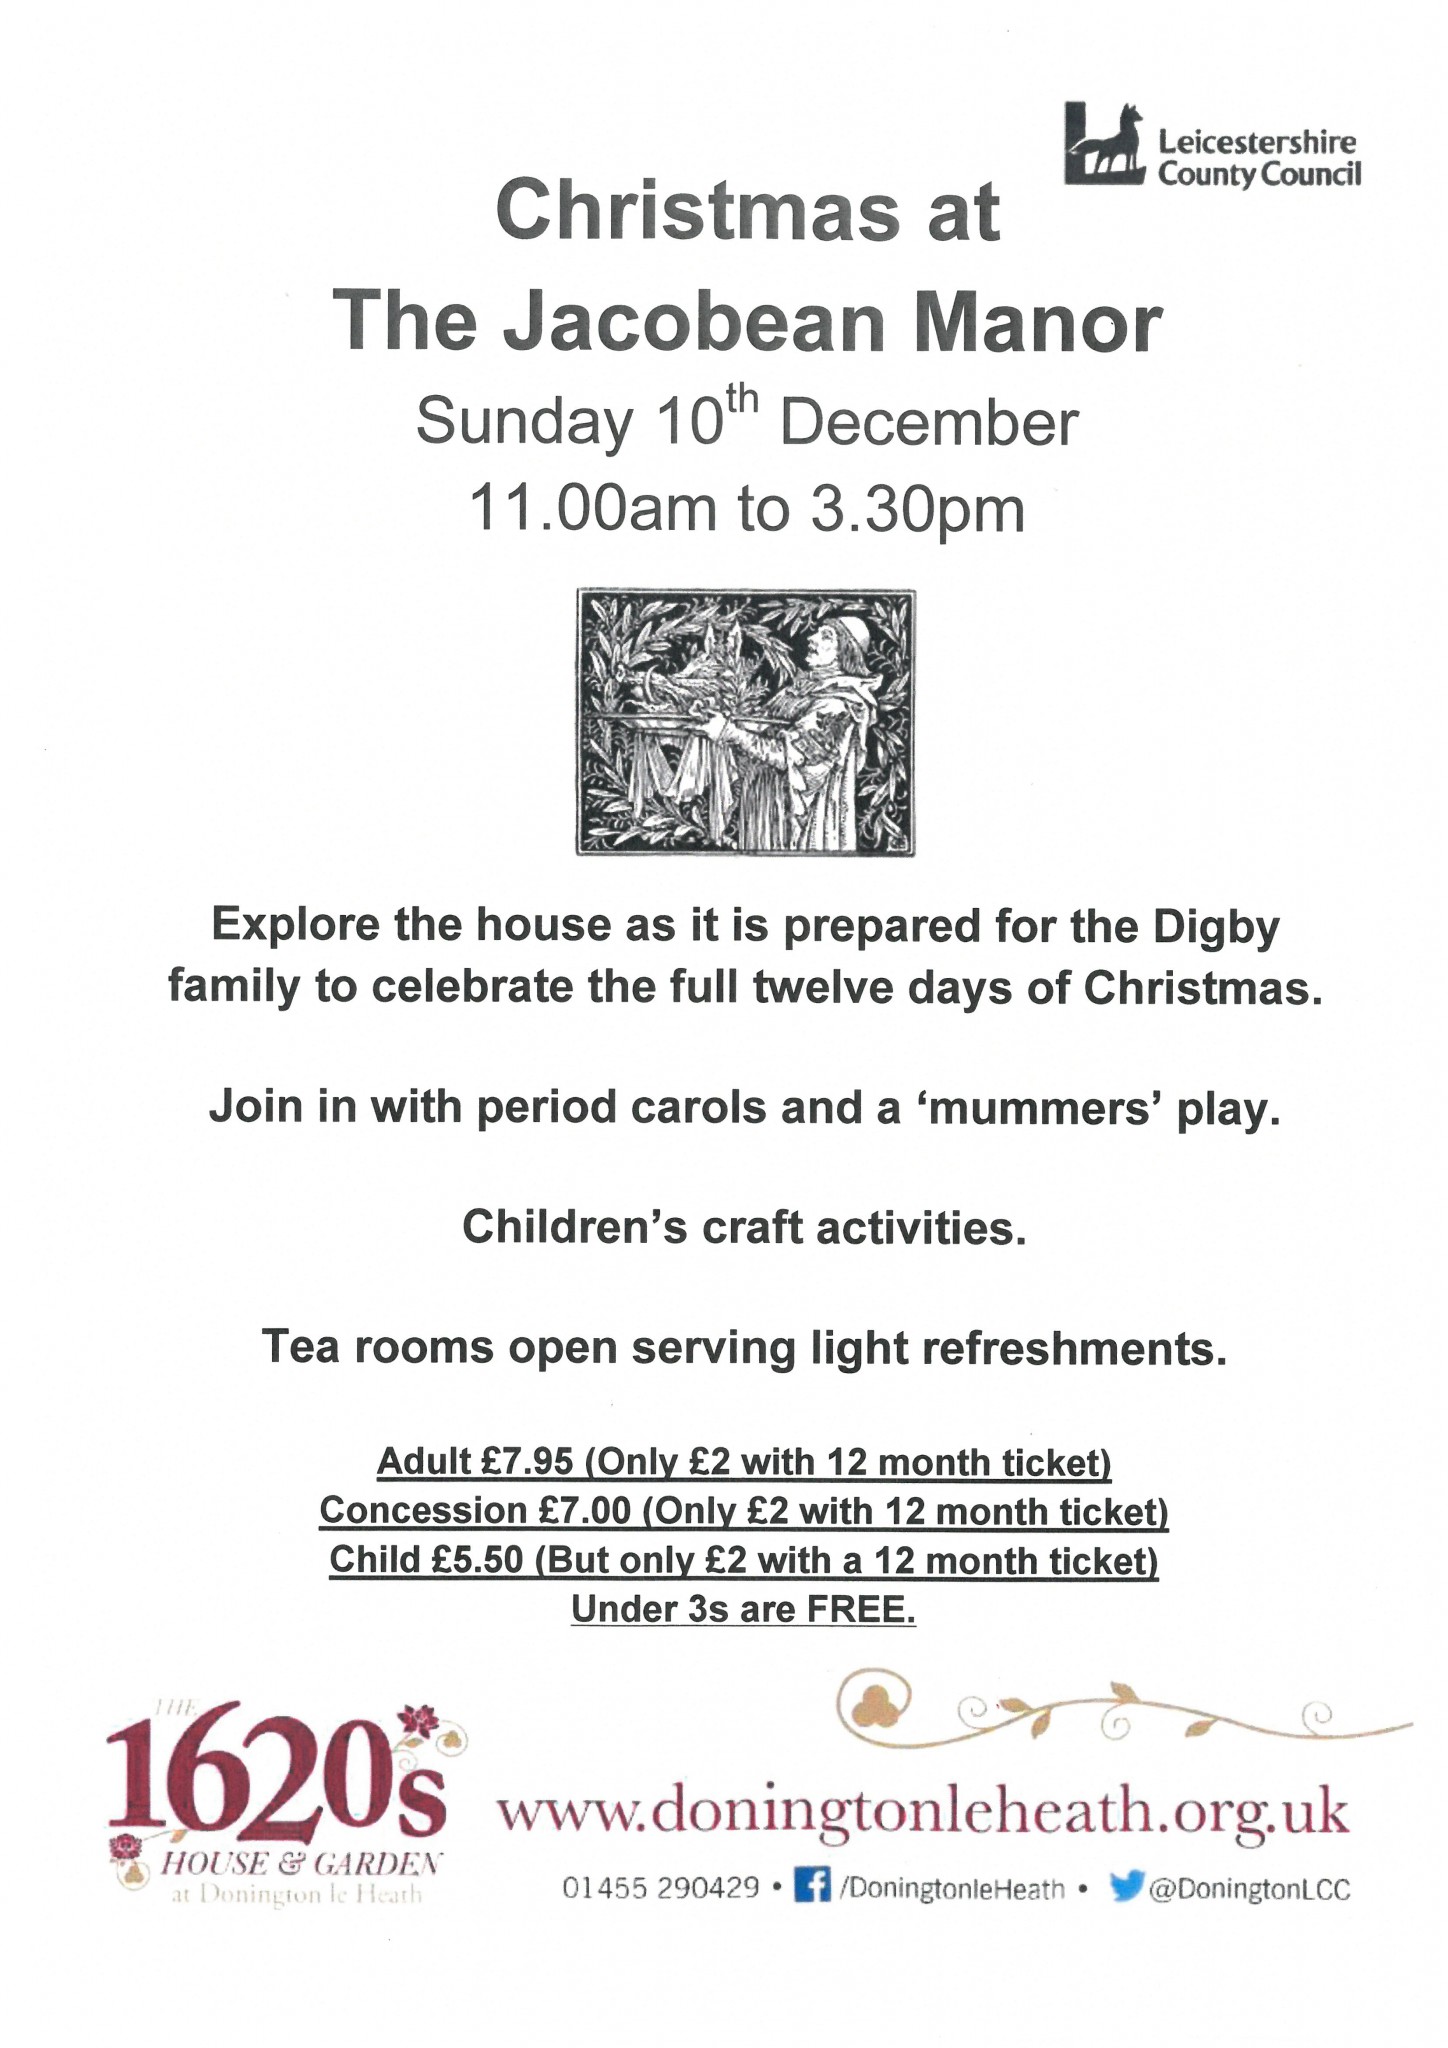 Christmas at the Jacobean Manor House - CANCELLED